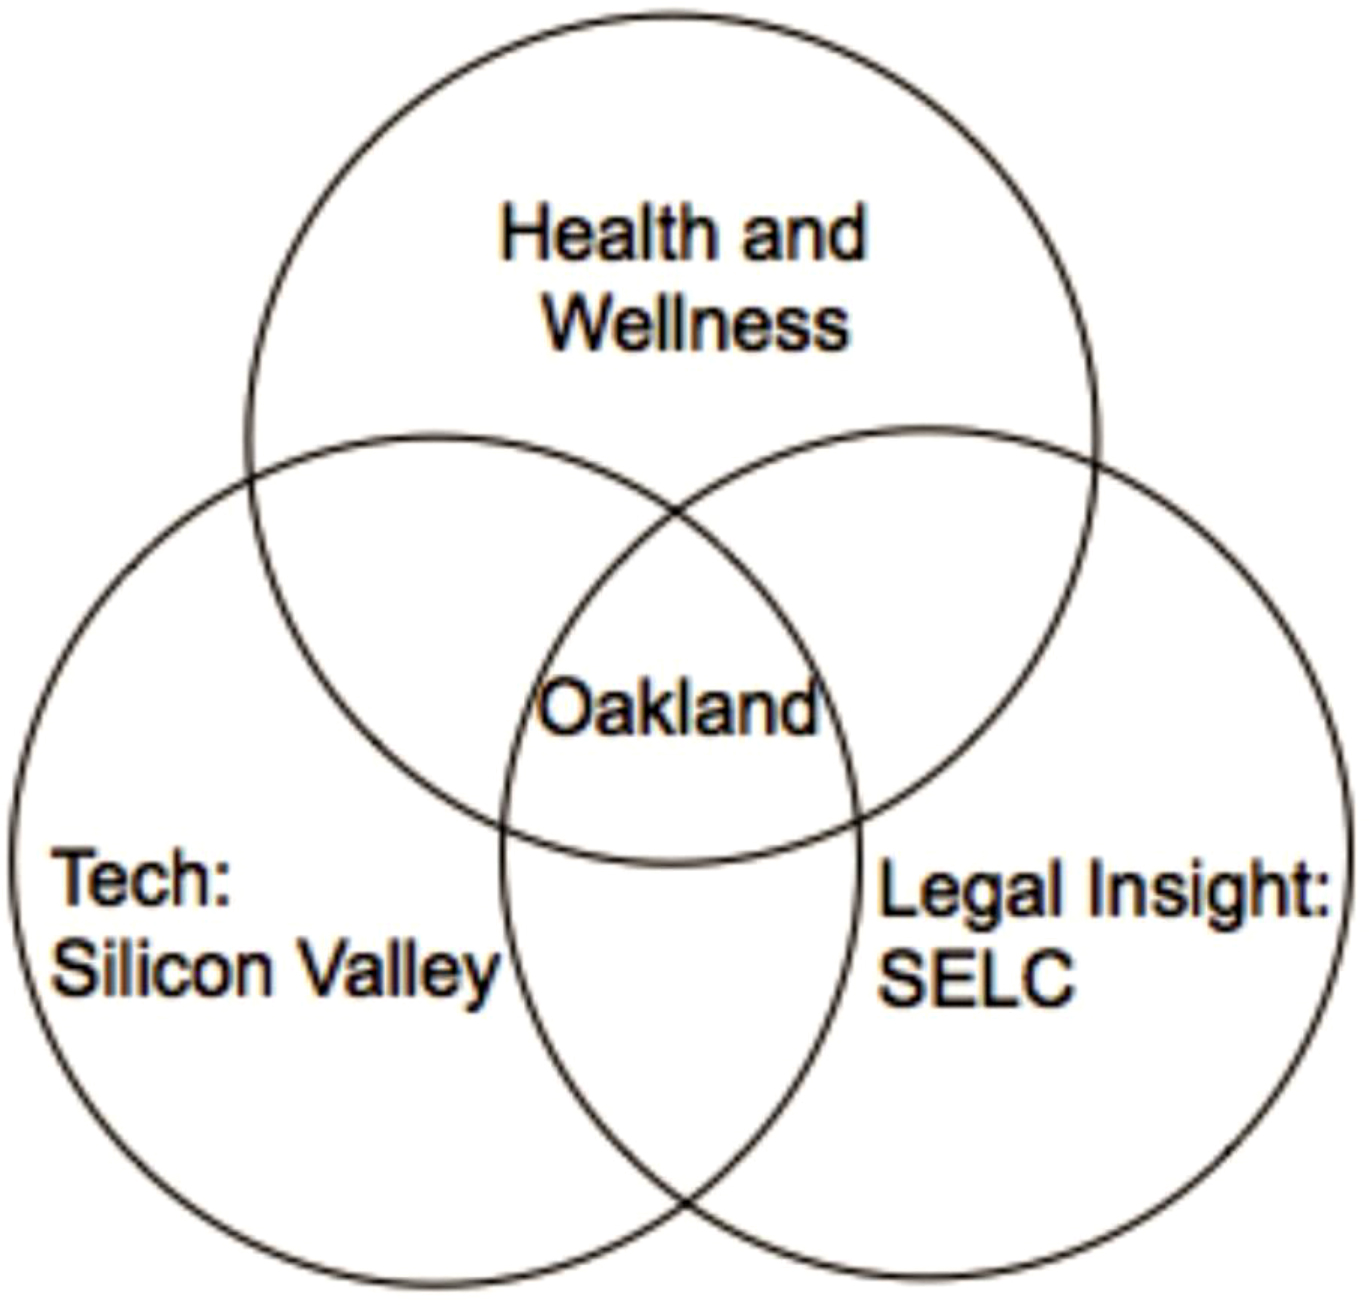 A Venn diagram with three circles labeled “Health and Wellness,” “Legal Insight: SELC,” and “Tech: Silicon Valley” shows the position of Oakland in health centric movements. Part of the diagram common to all three circles is labeled “Oakland.”